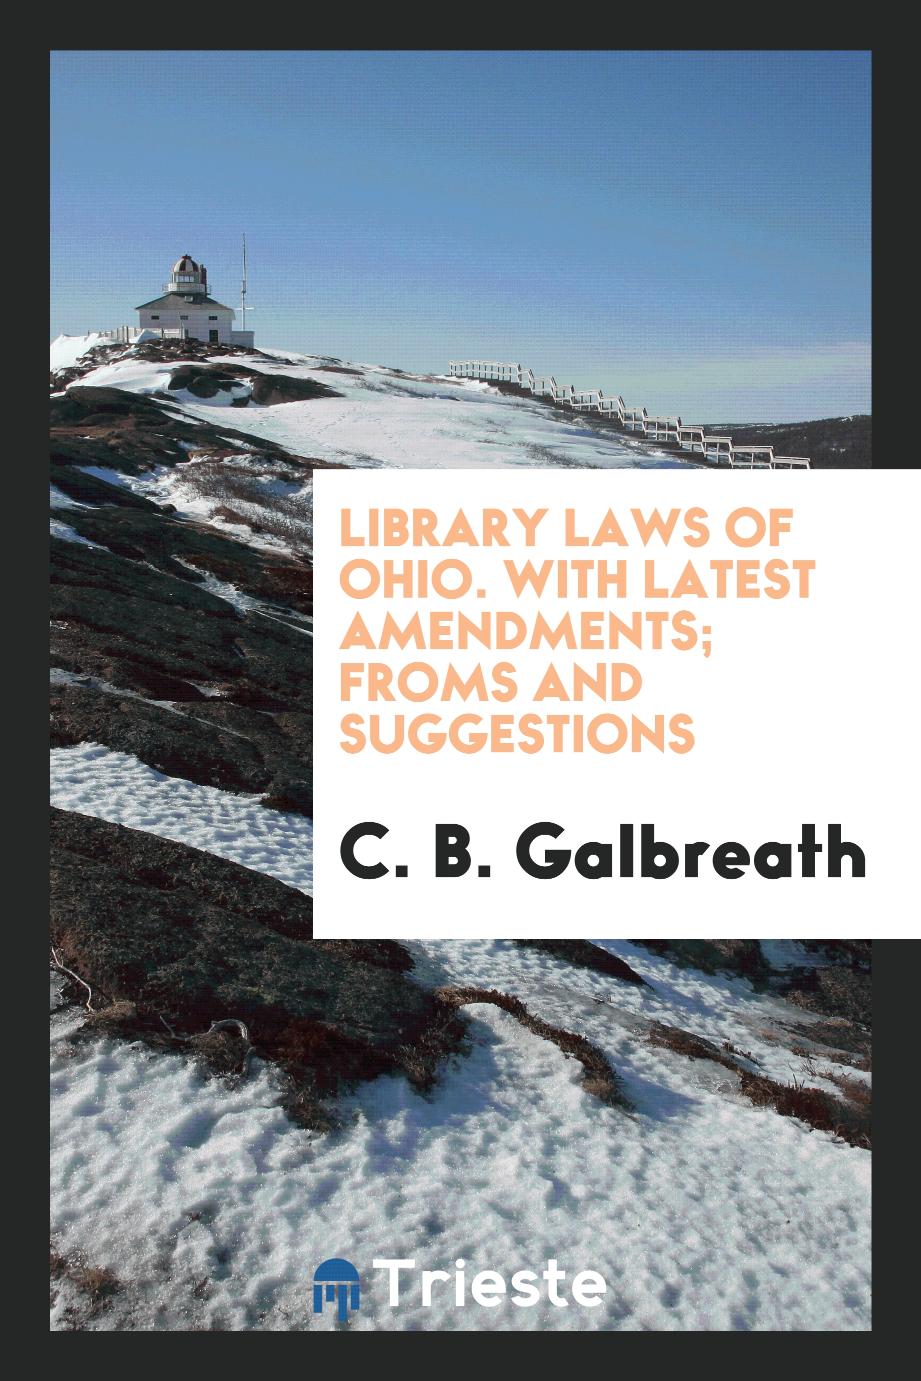 Library Laws of Ohio. With Latest Amendments; Froms and Suggestions